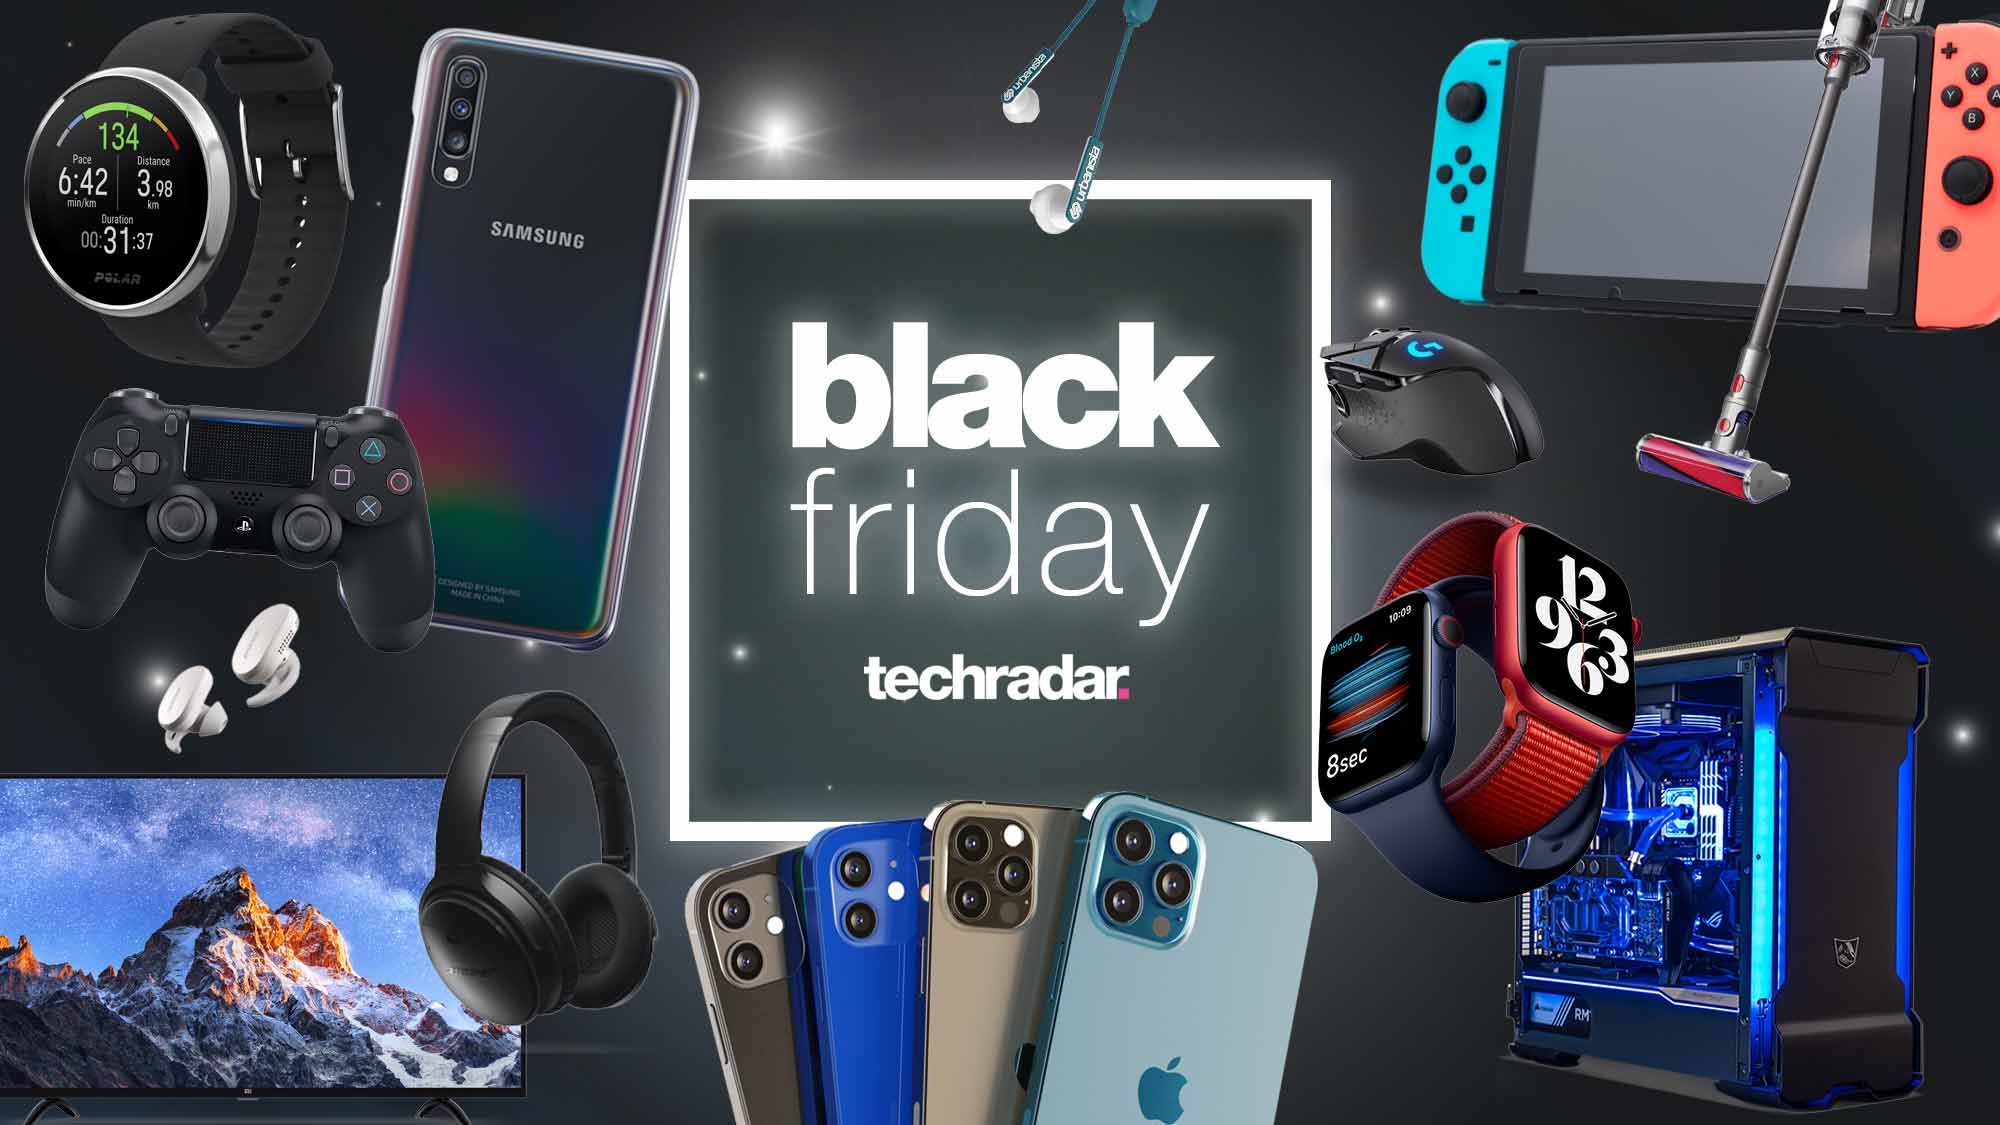 John Lewis Black Friday Phone Deals: Two-year Guarantee On Top Of Price Matches